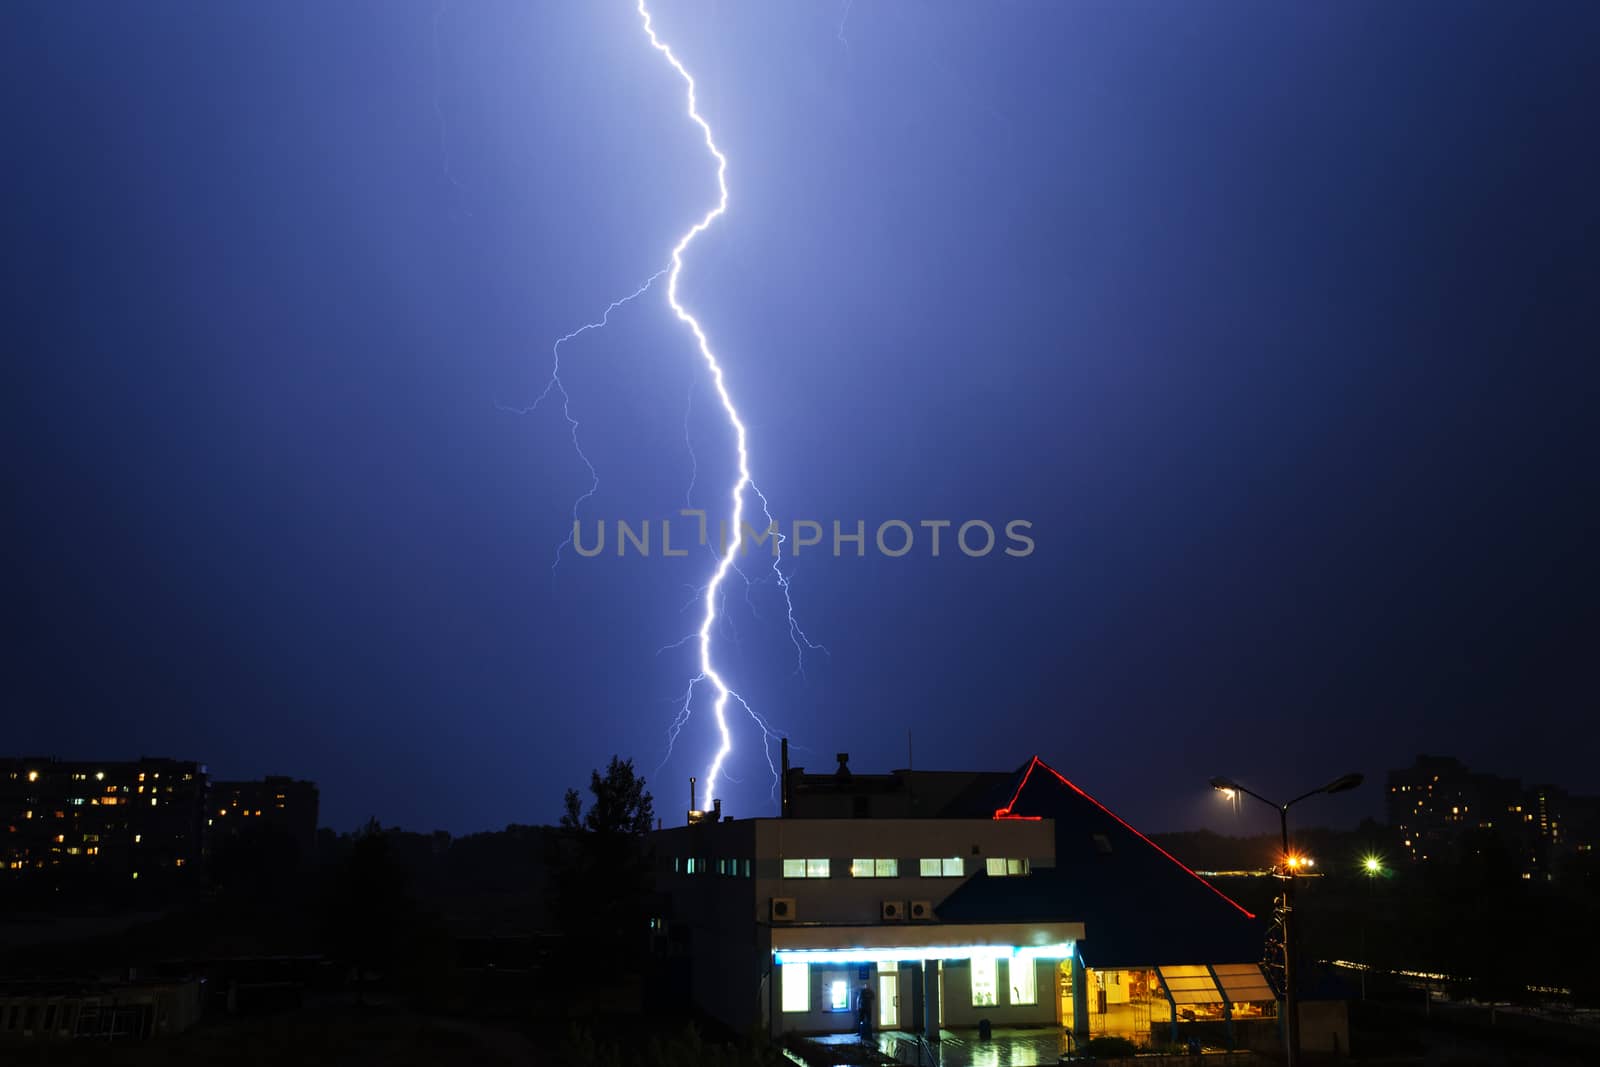 Severe lightning storm over a city buildings by s96serg